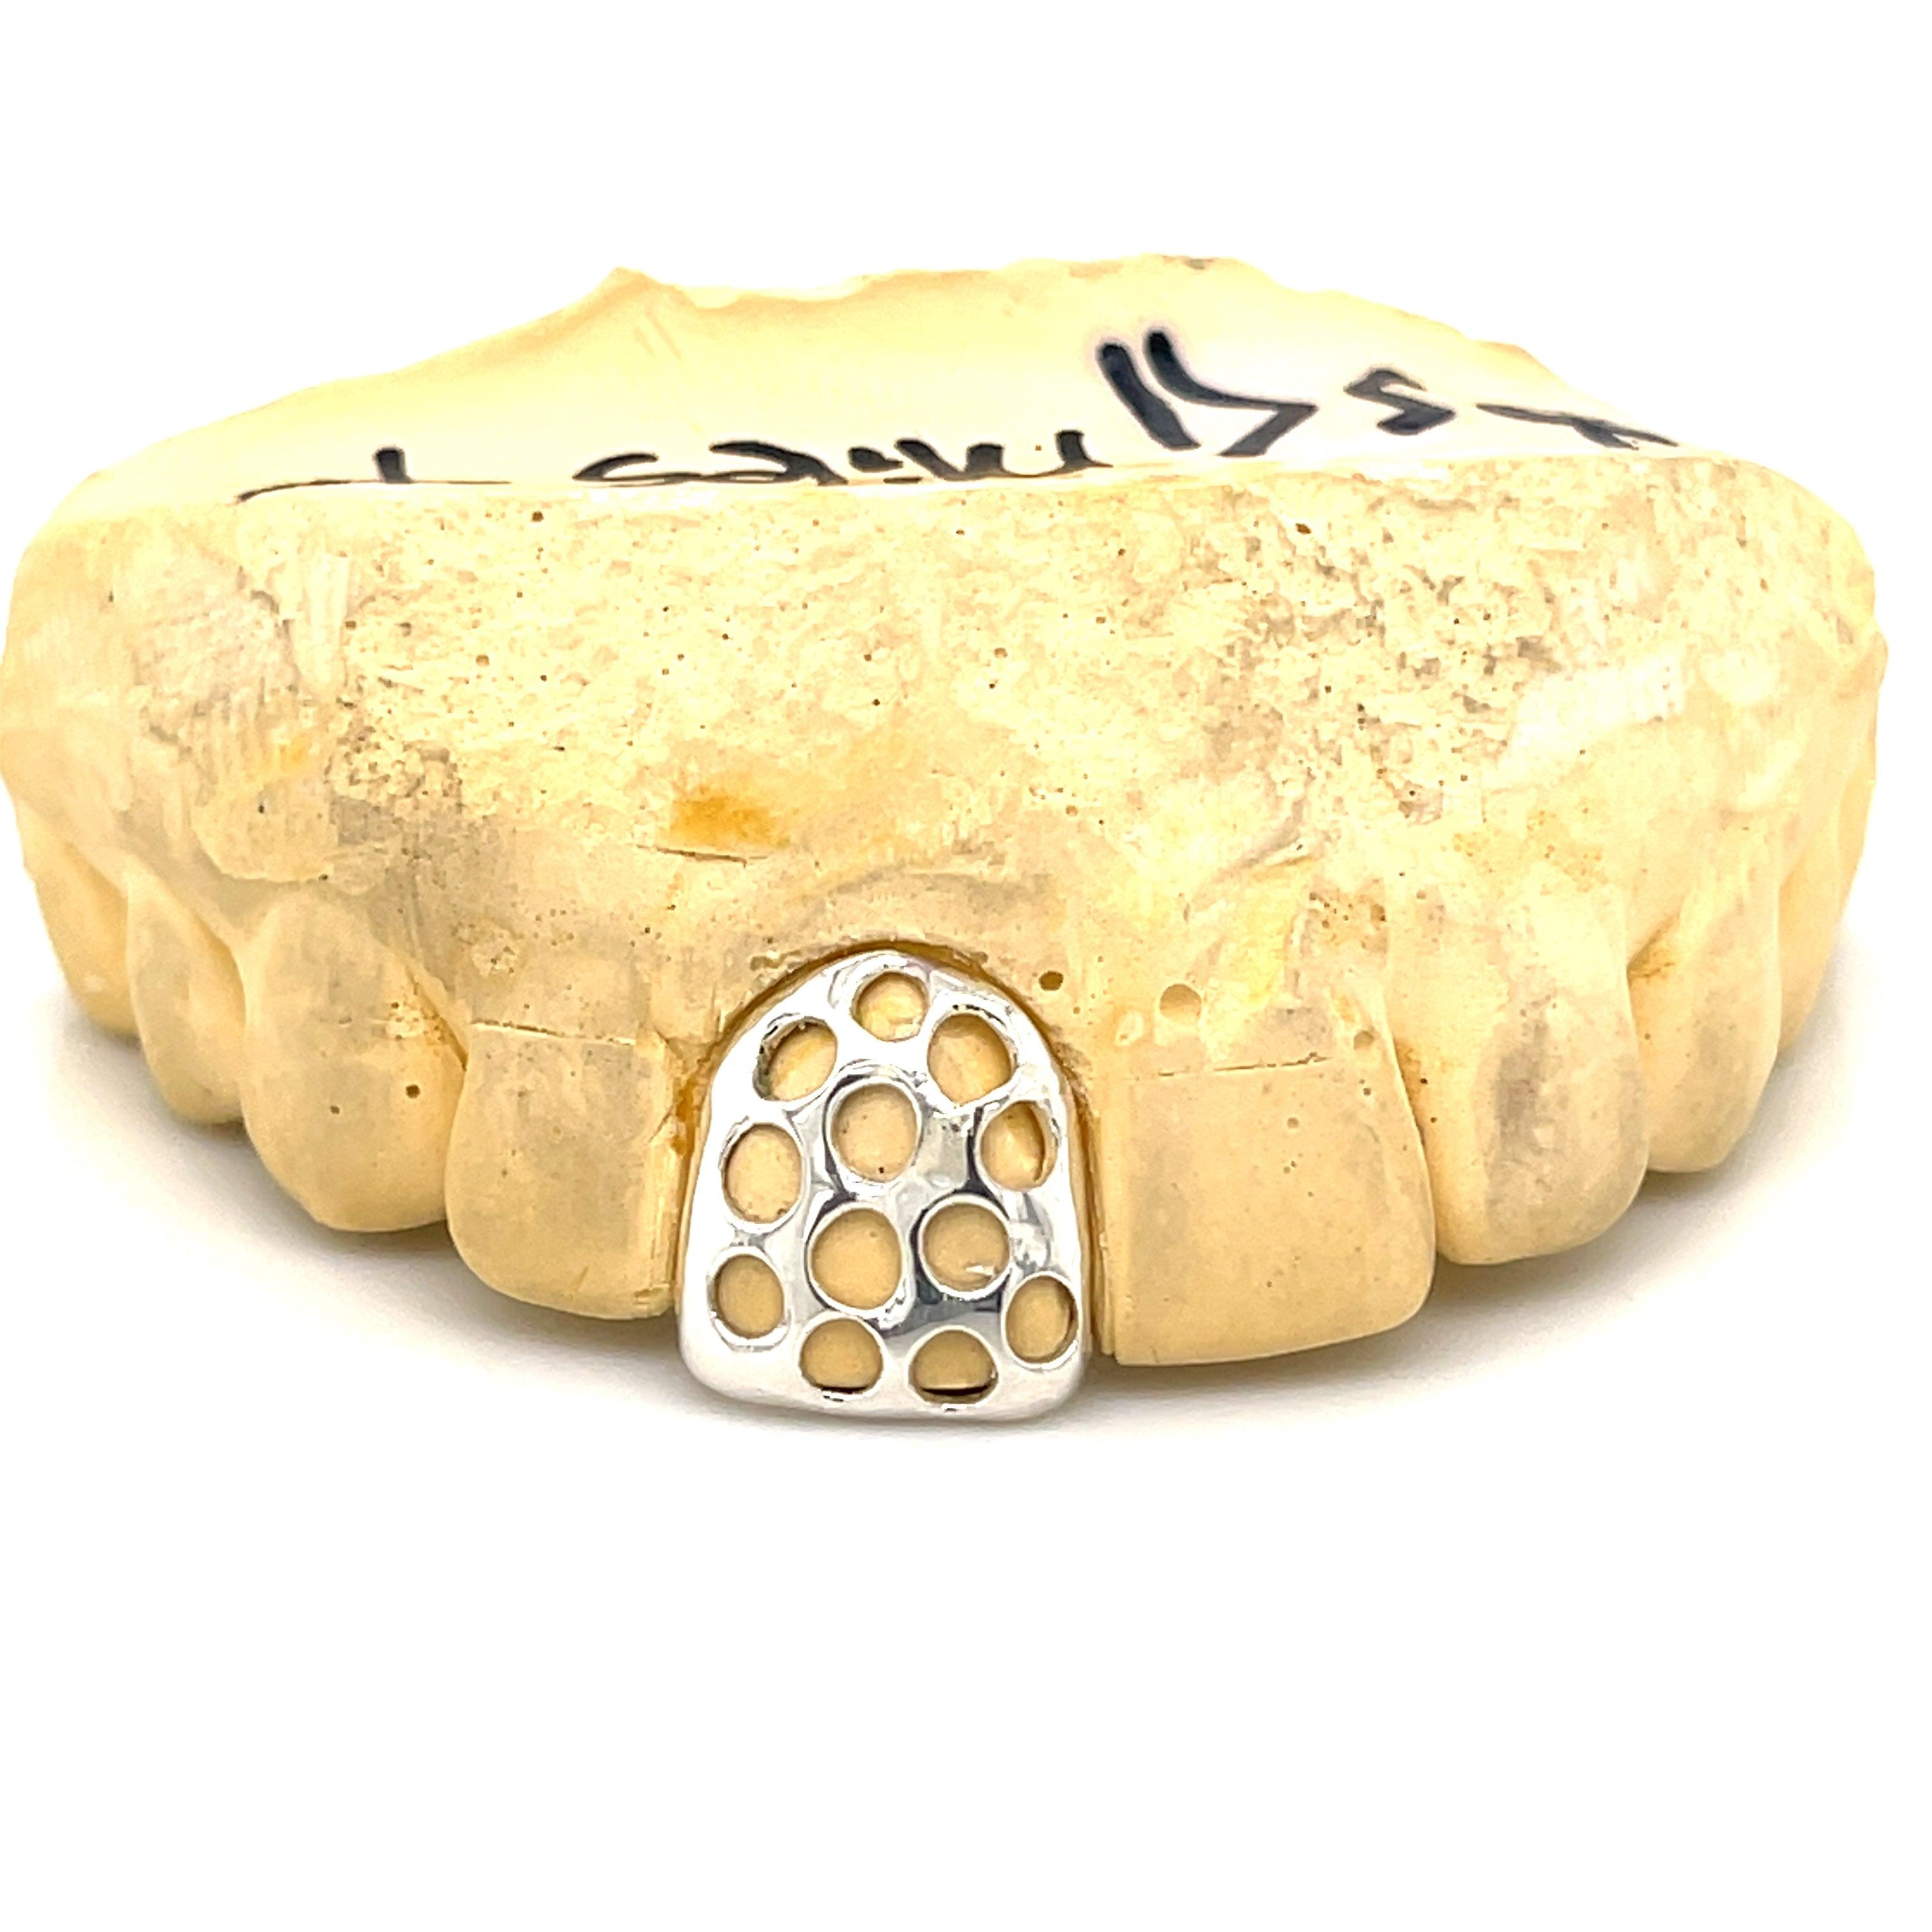 1pc Silver Cheese Grater Grillz - Seattle Gold Grillz